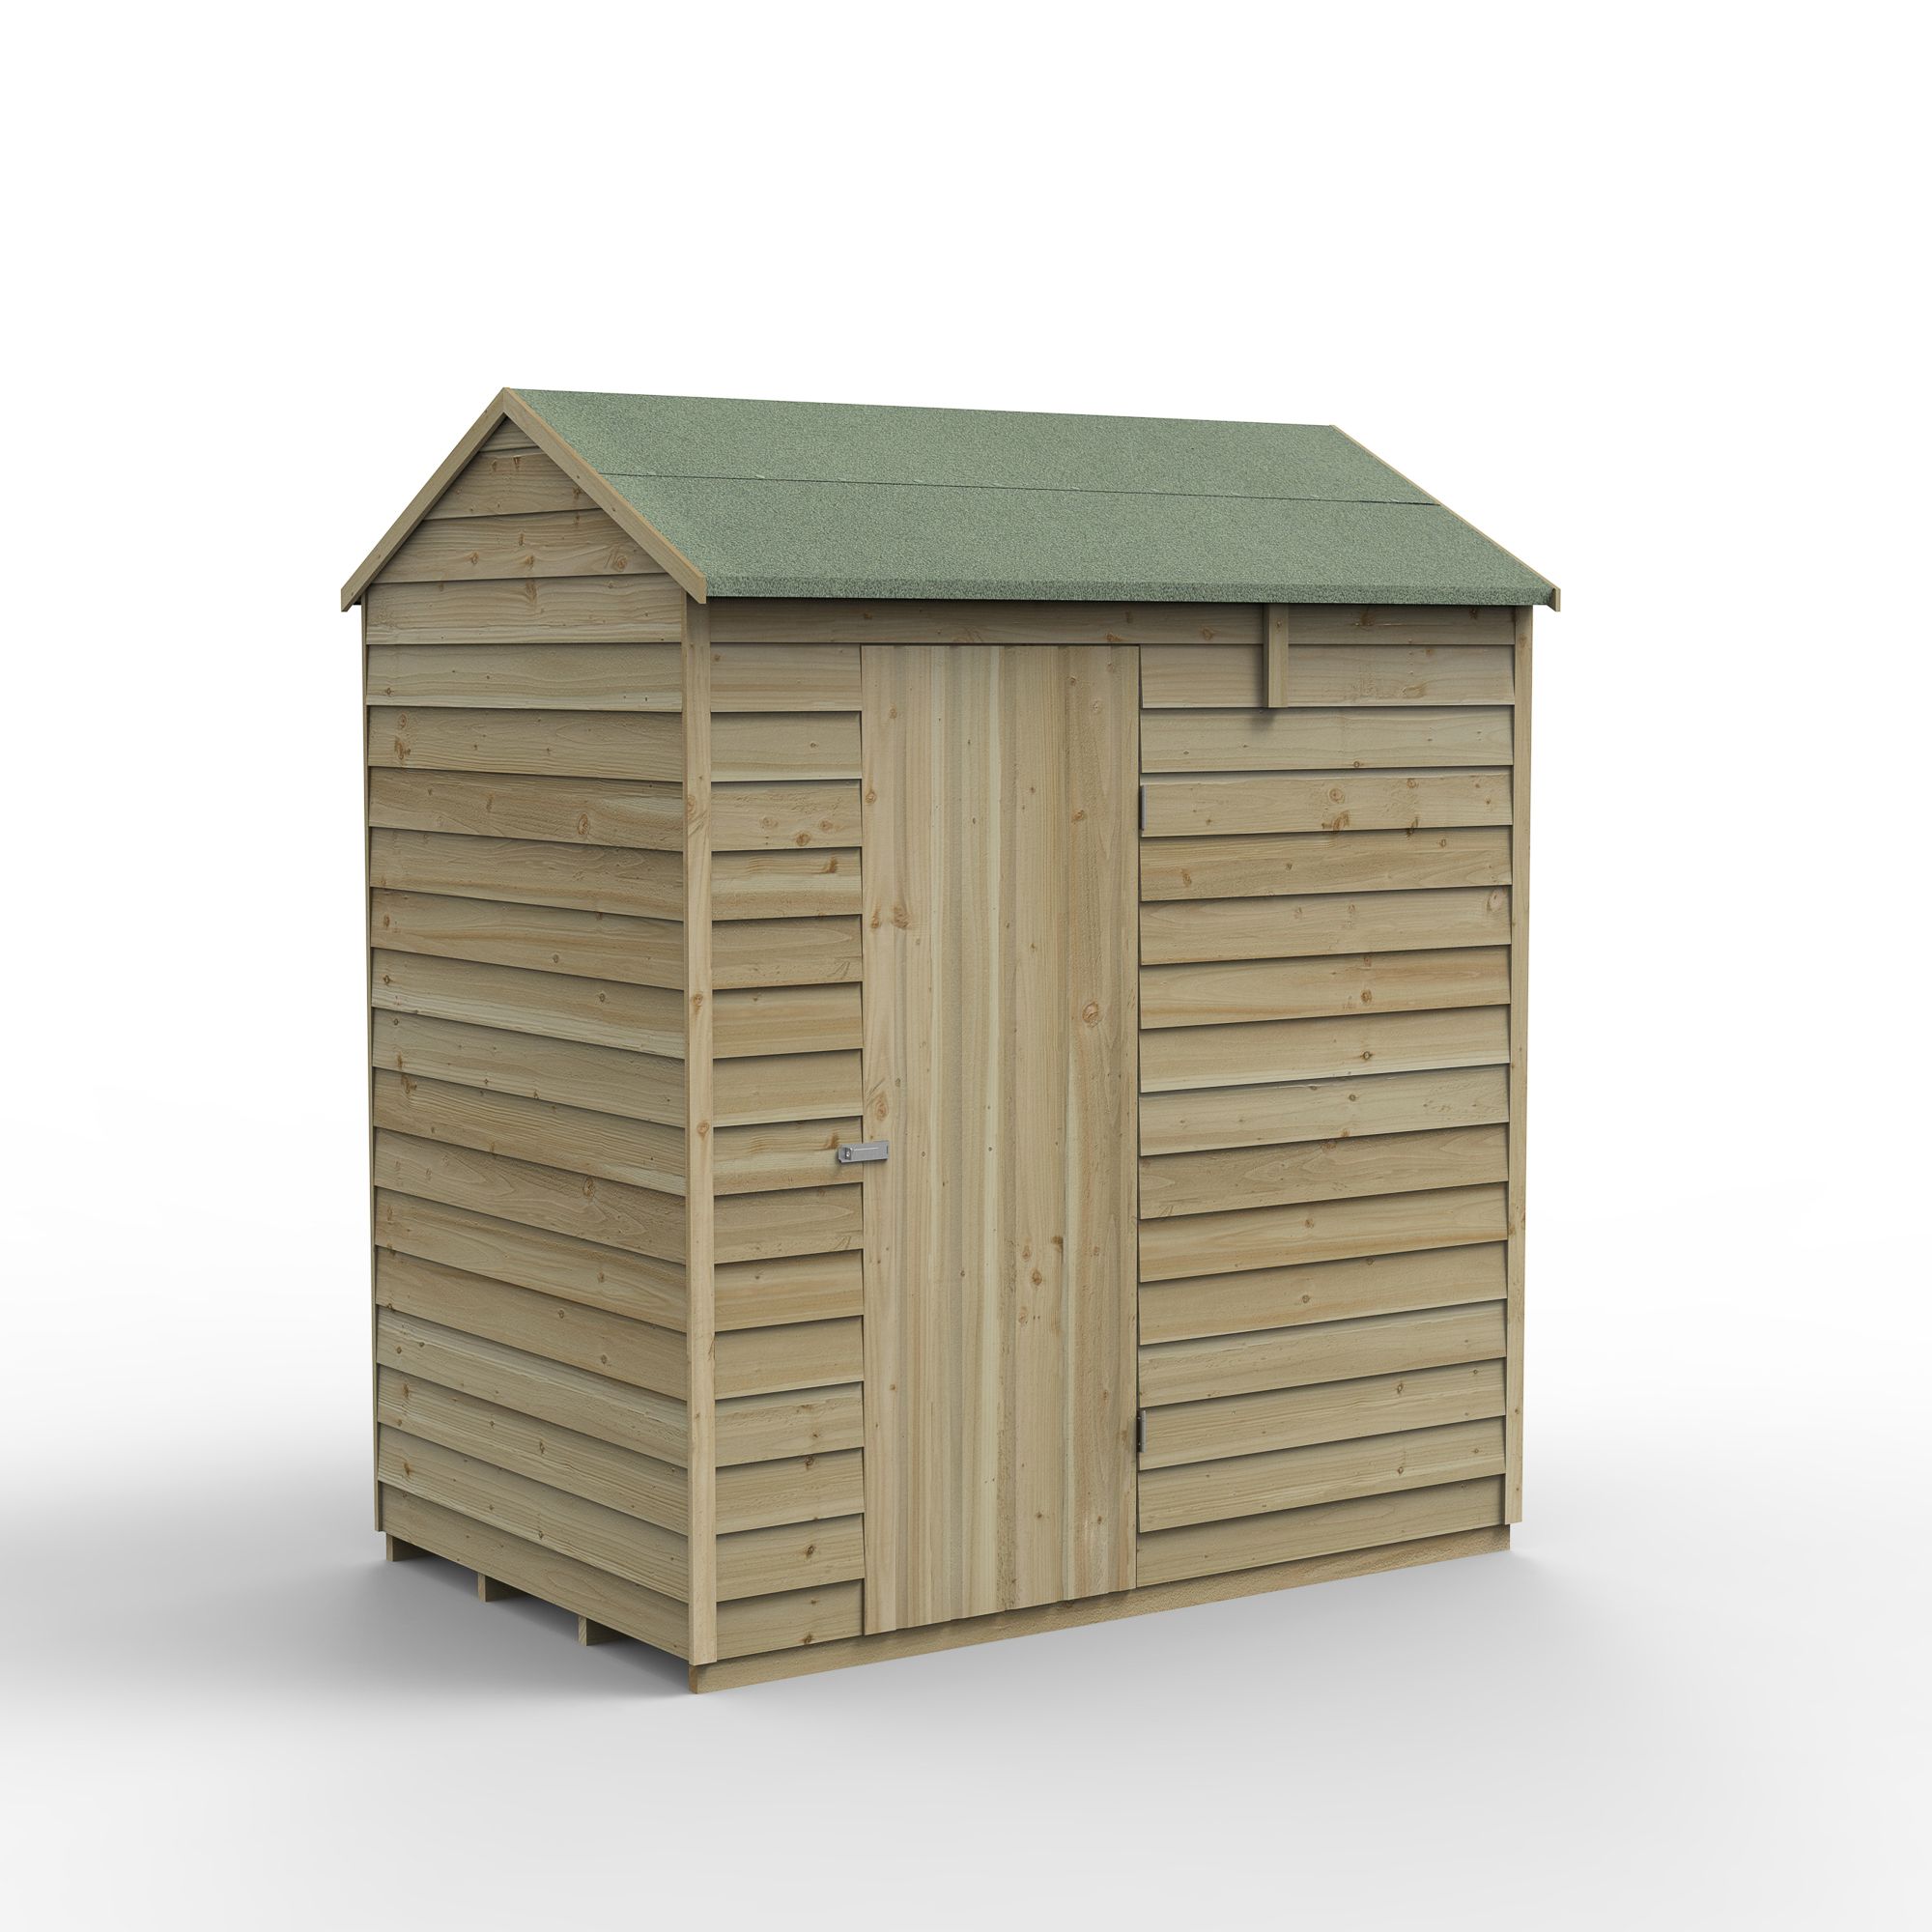 Forest Garden Overlap 6x4 ft Reverse apex Wooden Shed with floor